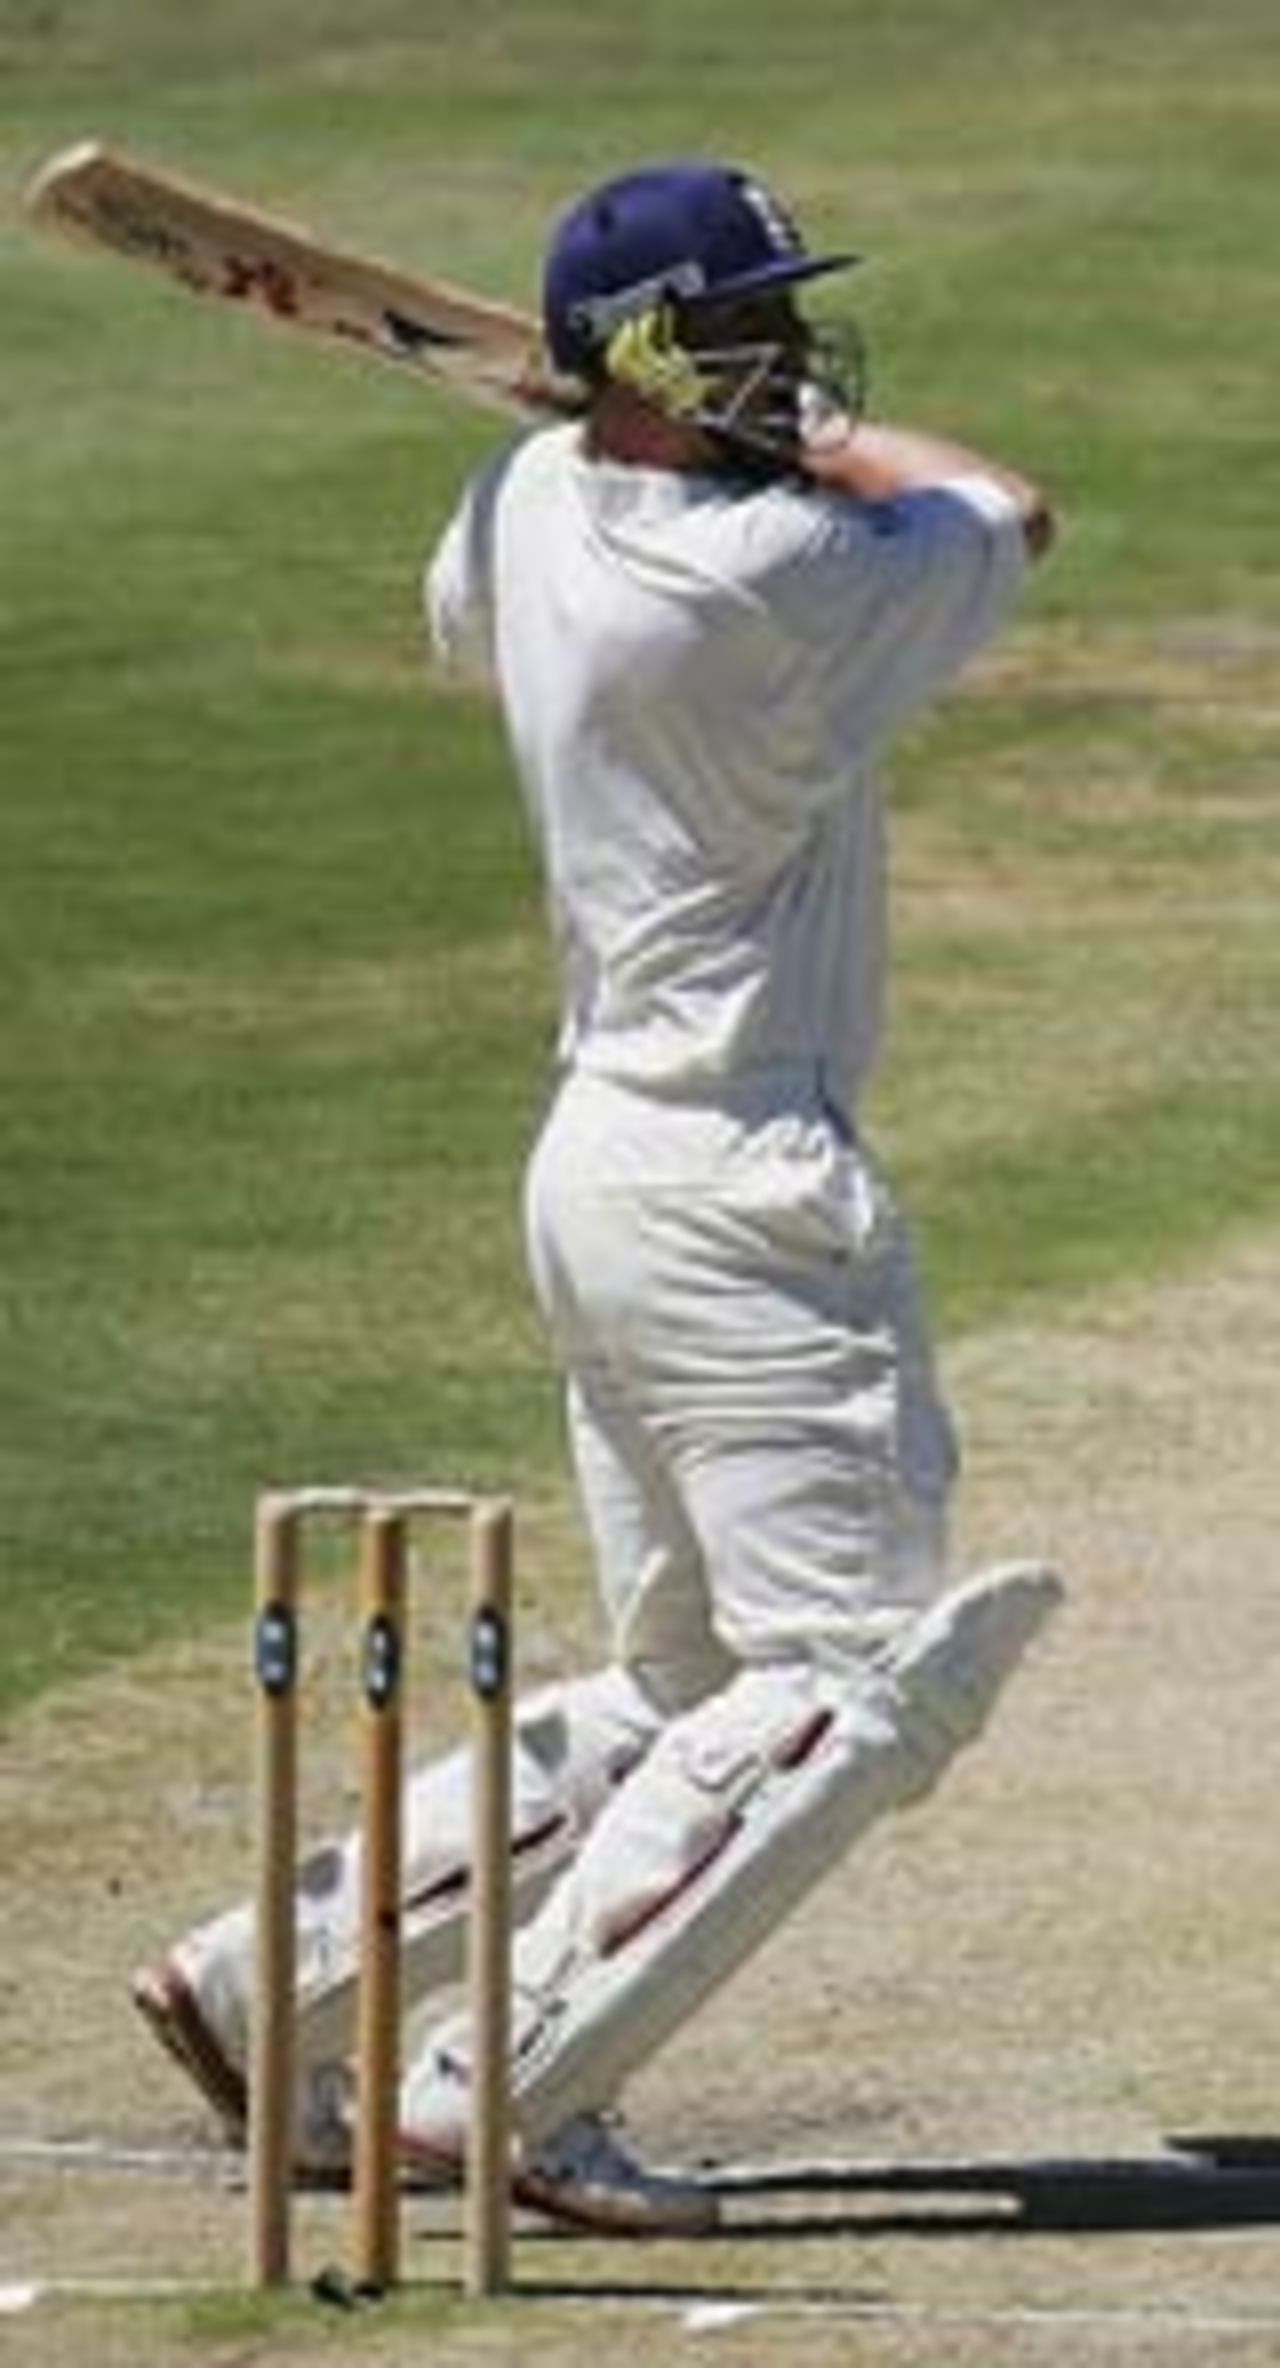 Andrew Flintoff punches one off the back foot, South Africa v England, 5th Test, Centurion, January 24, 2005